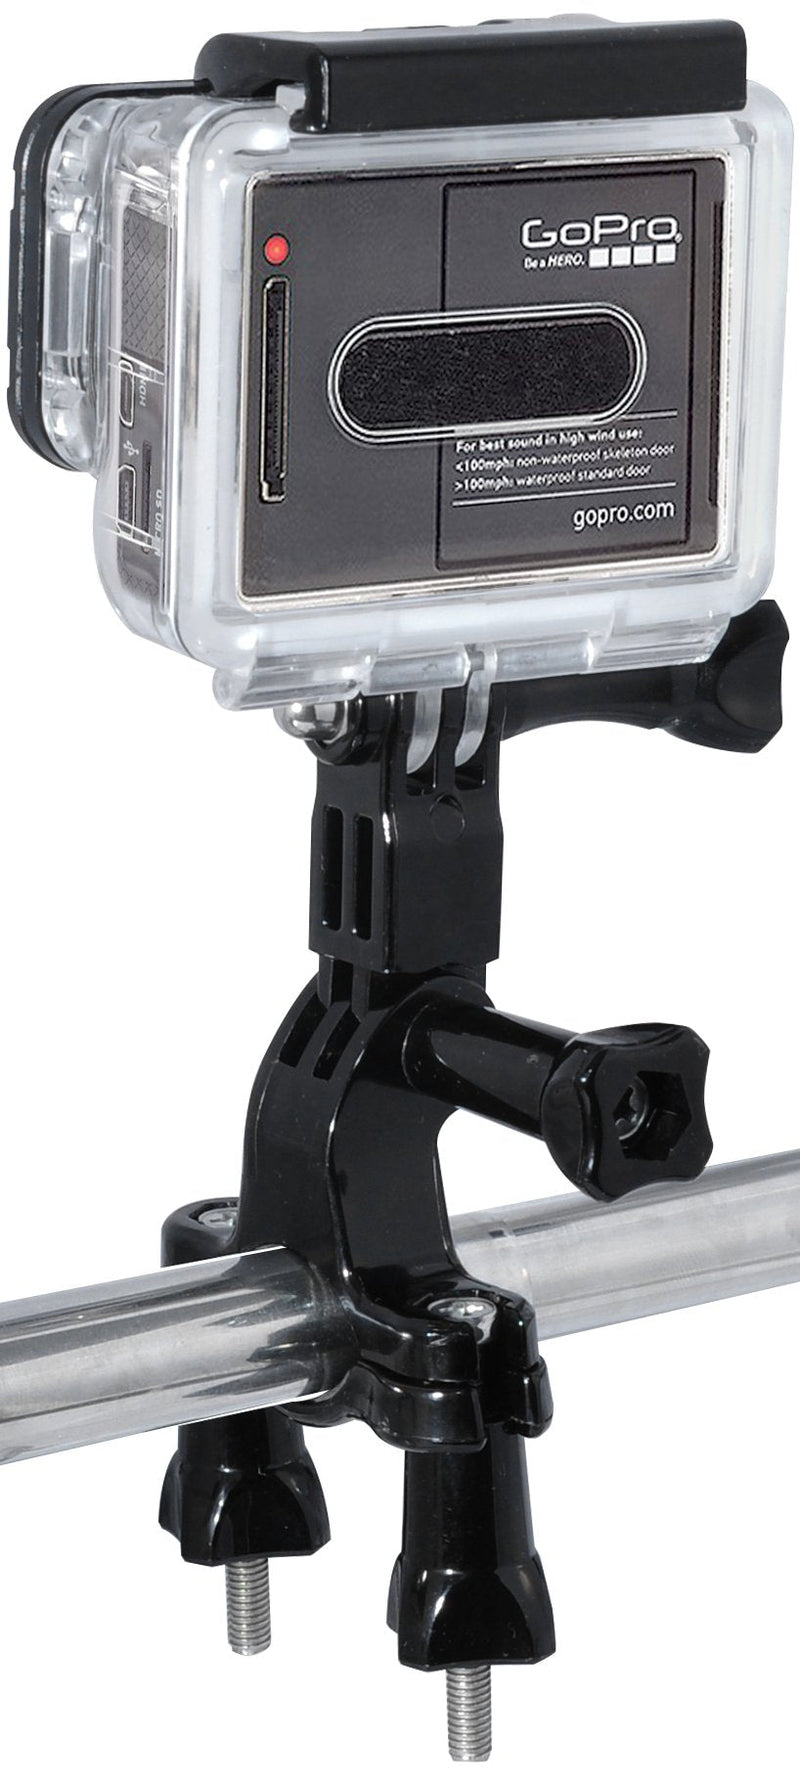 Xit XTGPBIKM Bike and Pole Mount for GoPro Hero Housings for Hero 3, 3+ and 4 Cameras (Black)